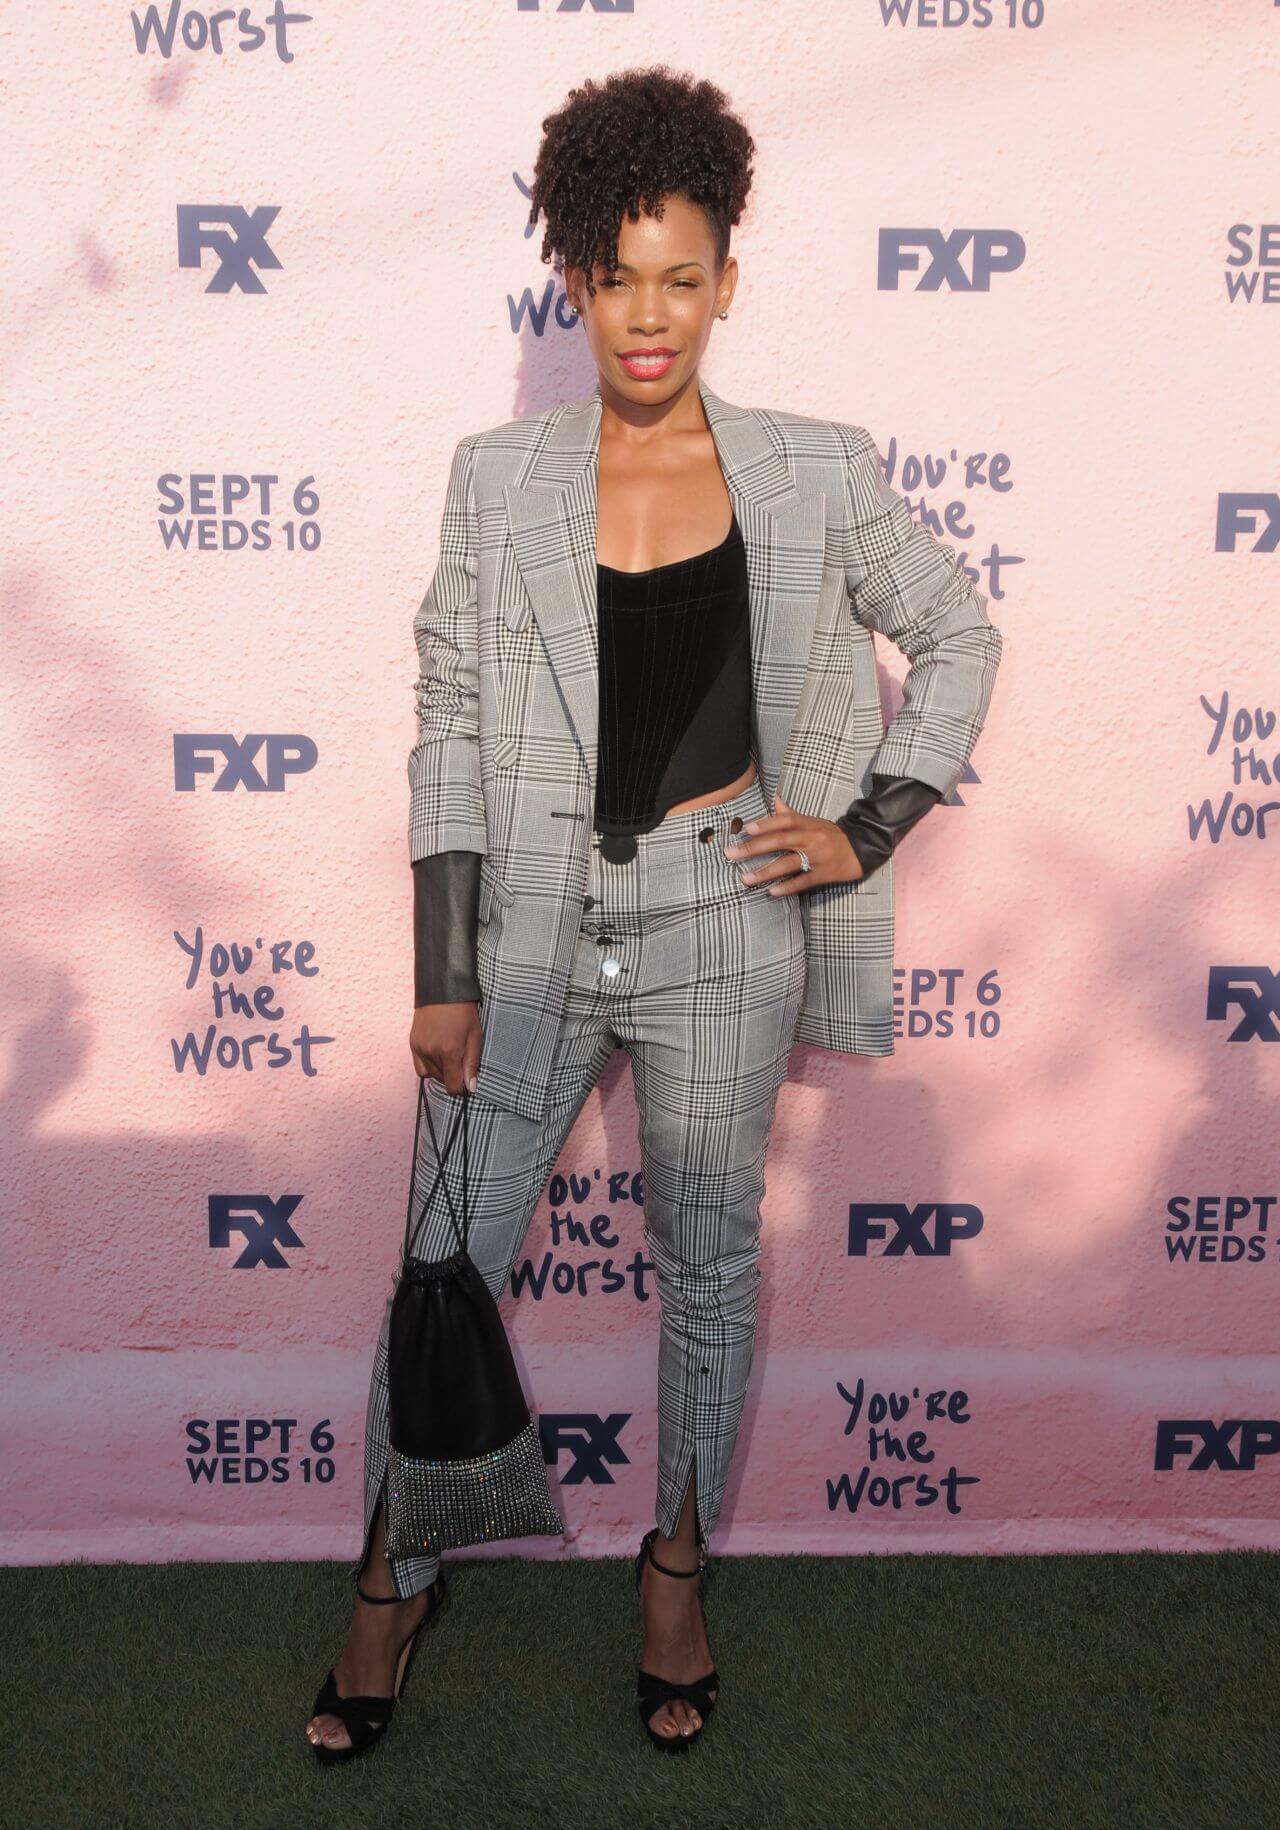 Angela Lewis In Grey Stripped Checks Blazer & Pants With Black Crop Top At“You’re the Worst” TV Show Premiere in Los Angeles